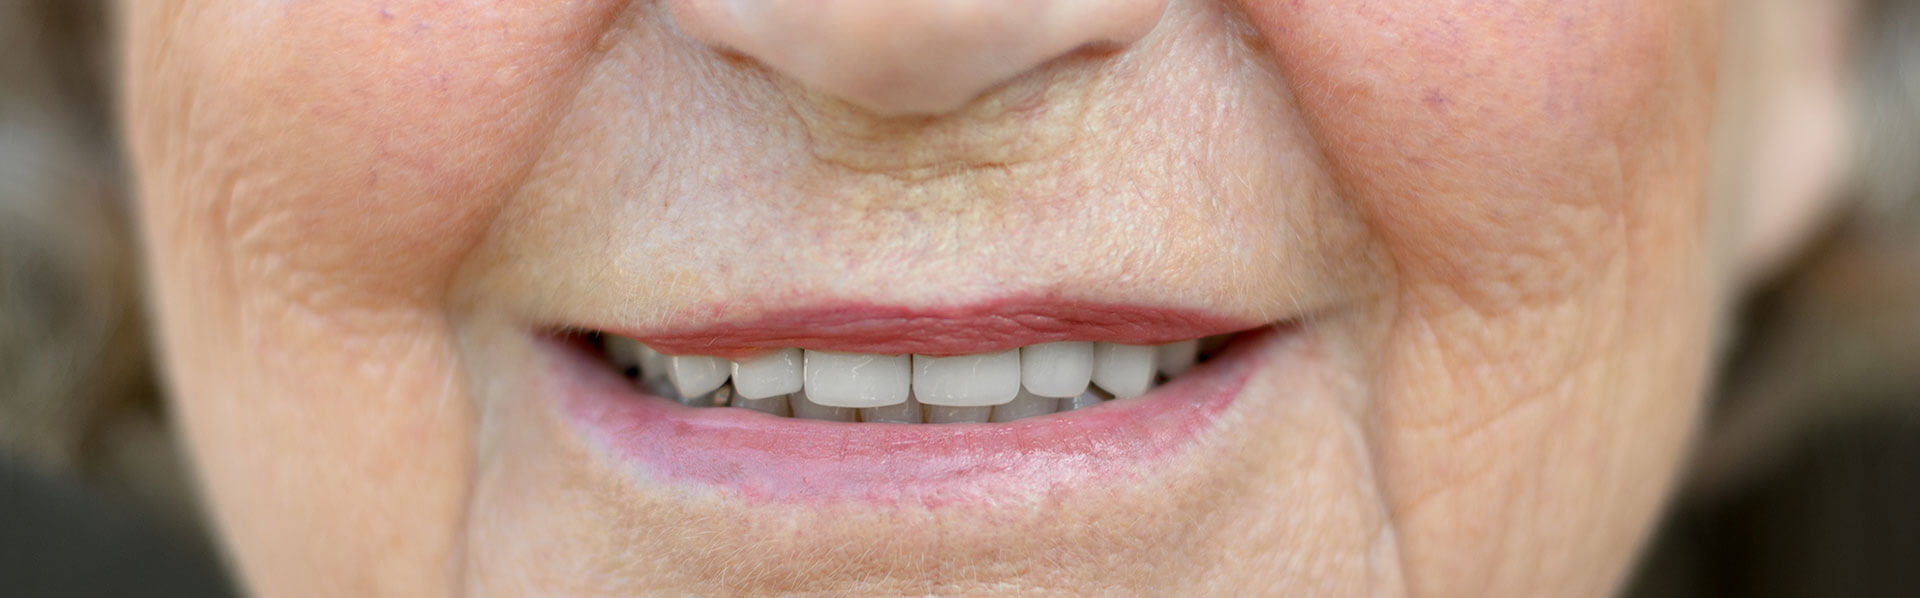 Woman's smiling lips